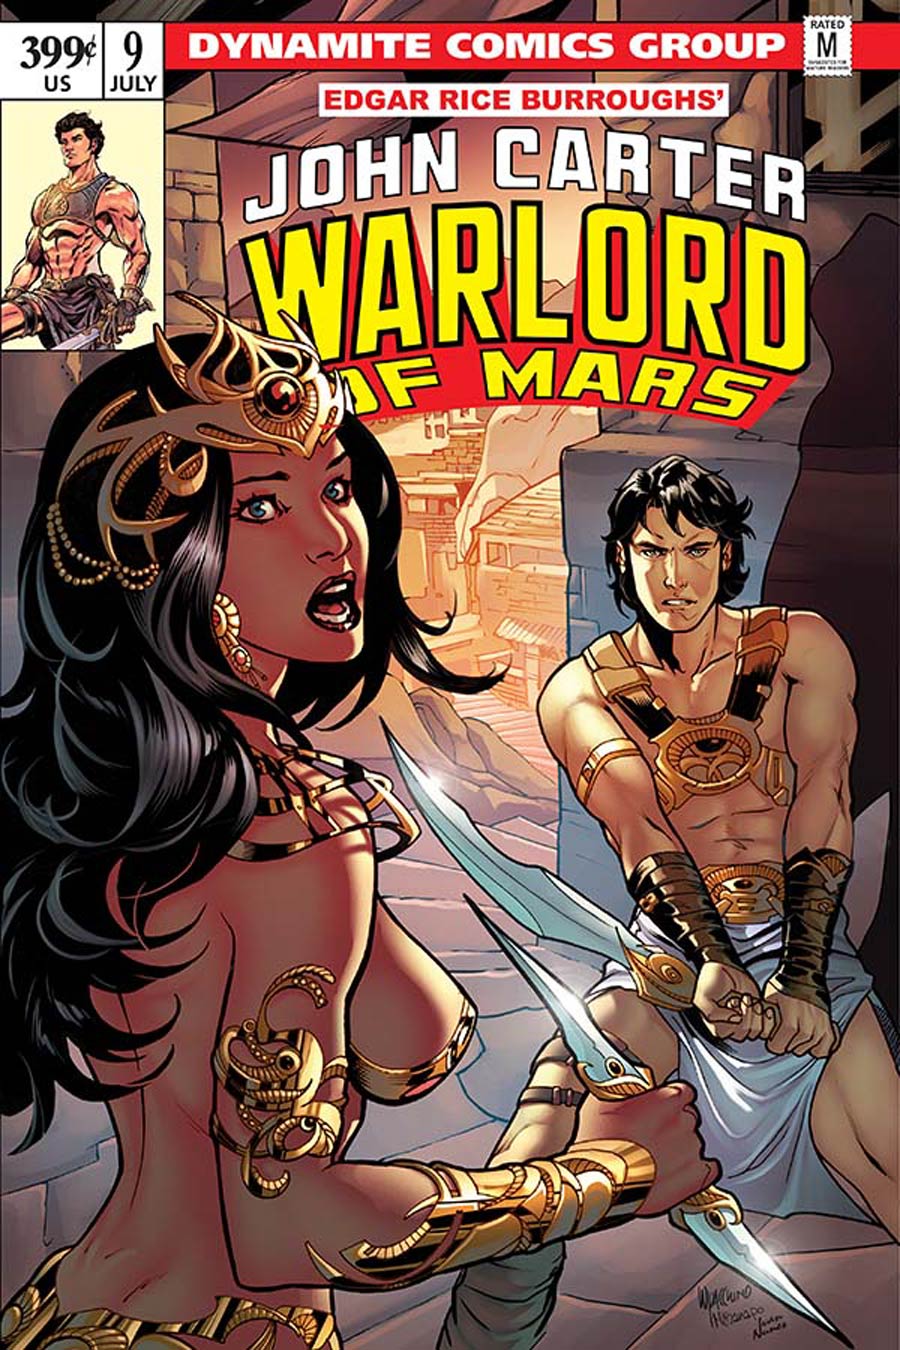 John Carter Warlord Of Mars Vol 2 #9 Cover C Variant Emanuela Lupacchino Cover